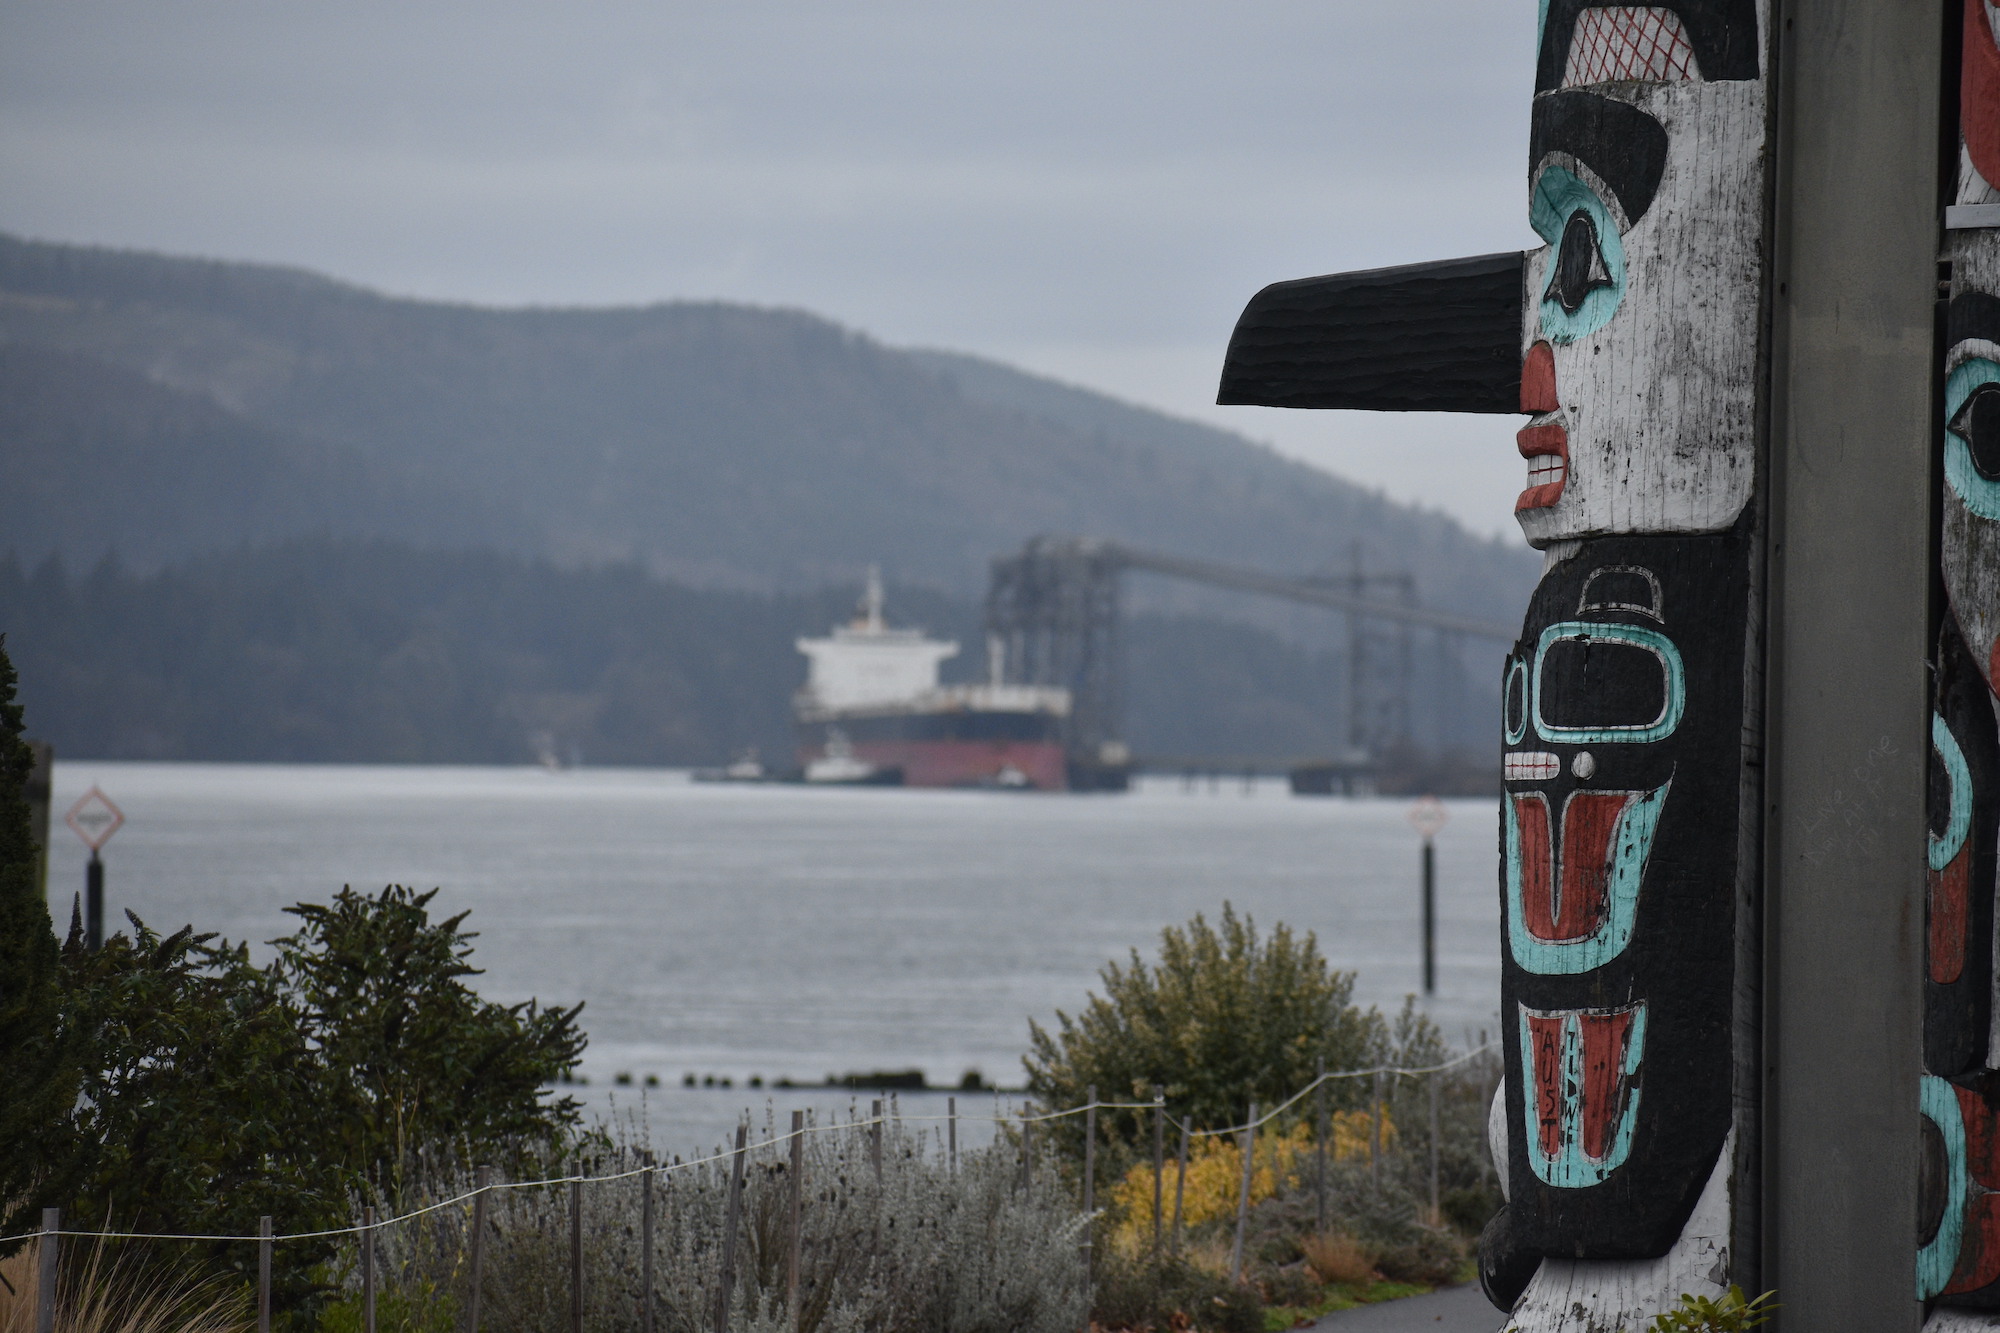 Totem poles carved by now-deceased Chief Lelooska overlook the Columbia River in Kalama, Washington, which sits on the traditional lands of the Cowlitz Indian Tribe and Confederated Tribes of Grand Ronde.